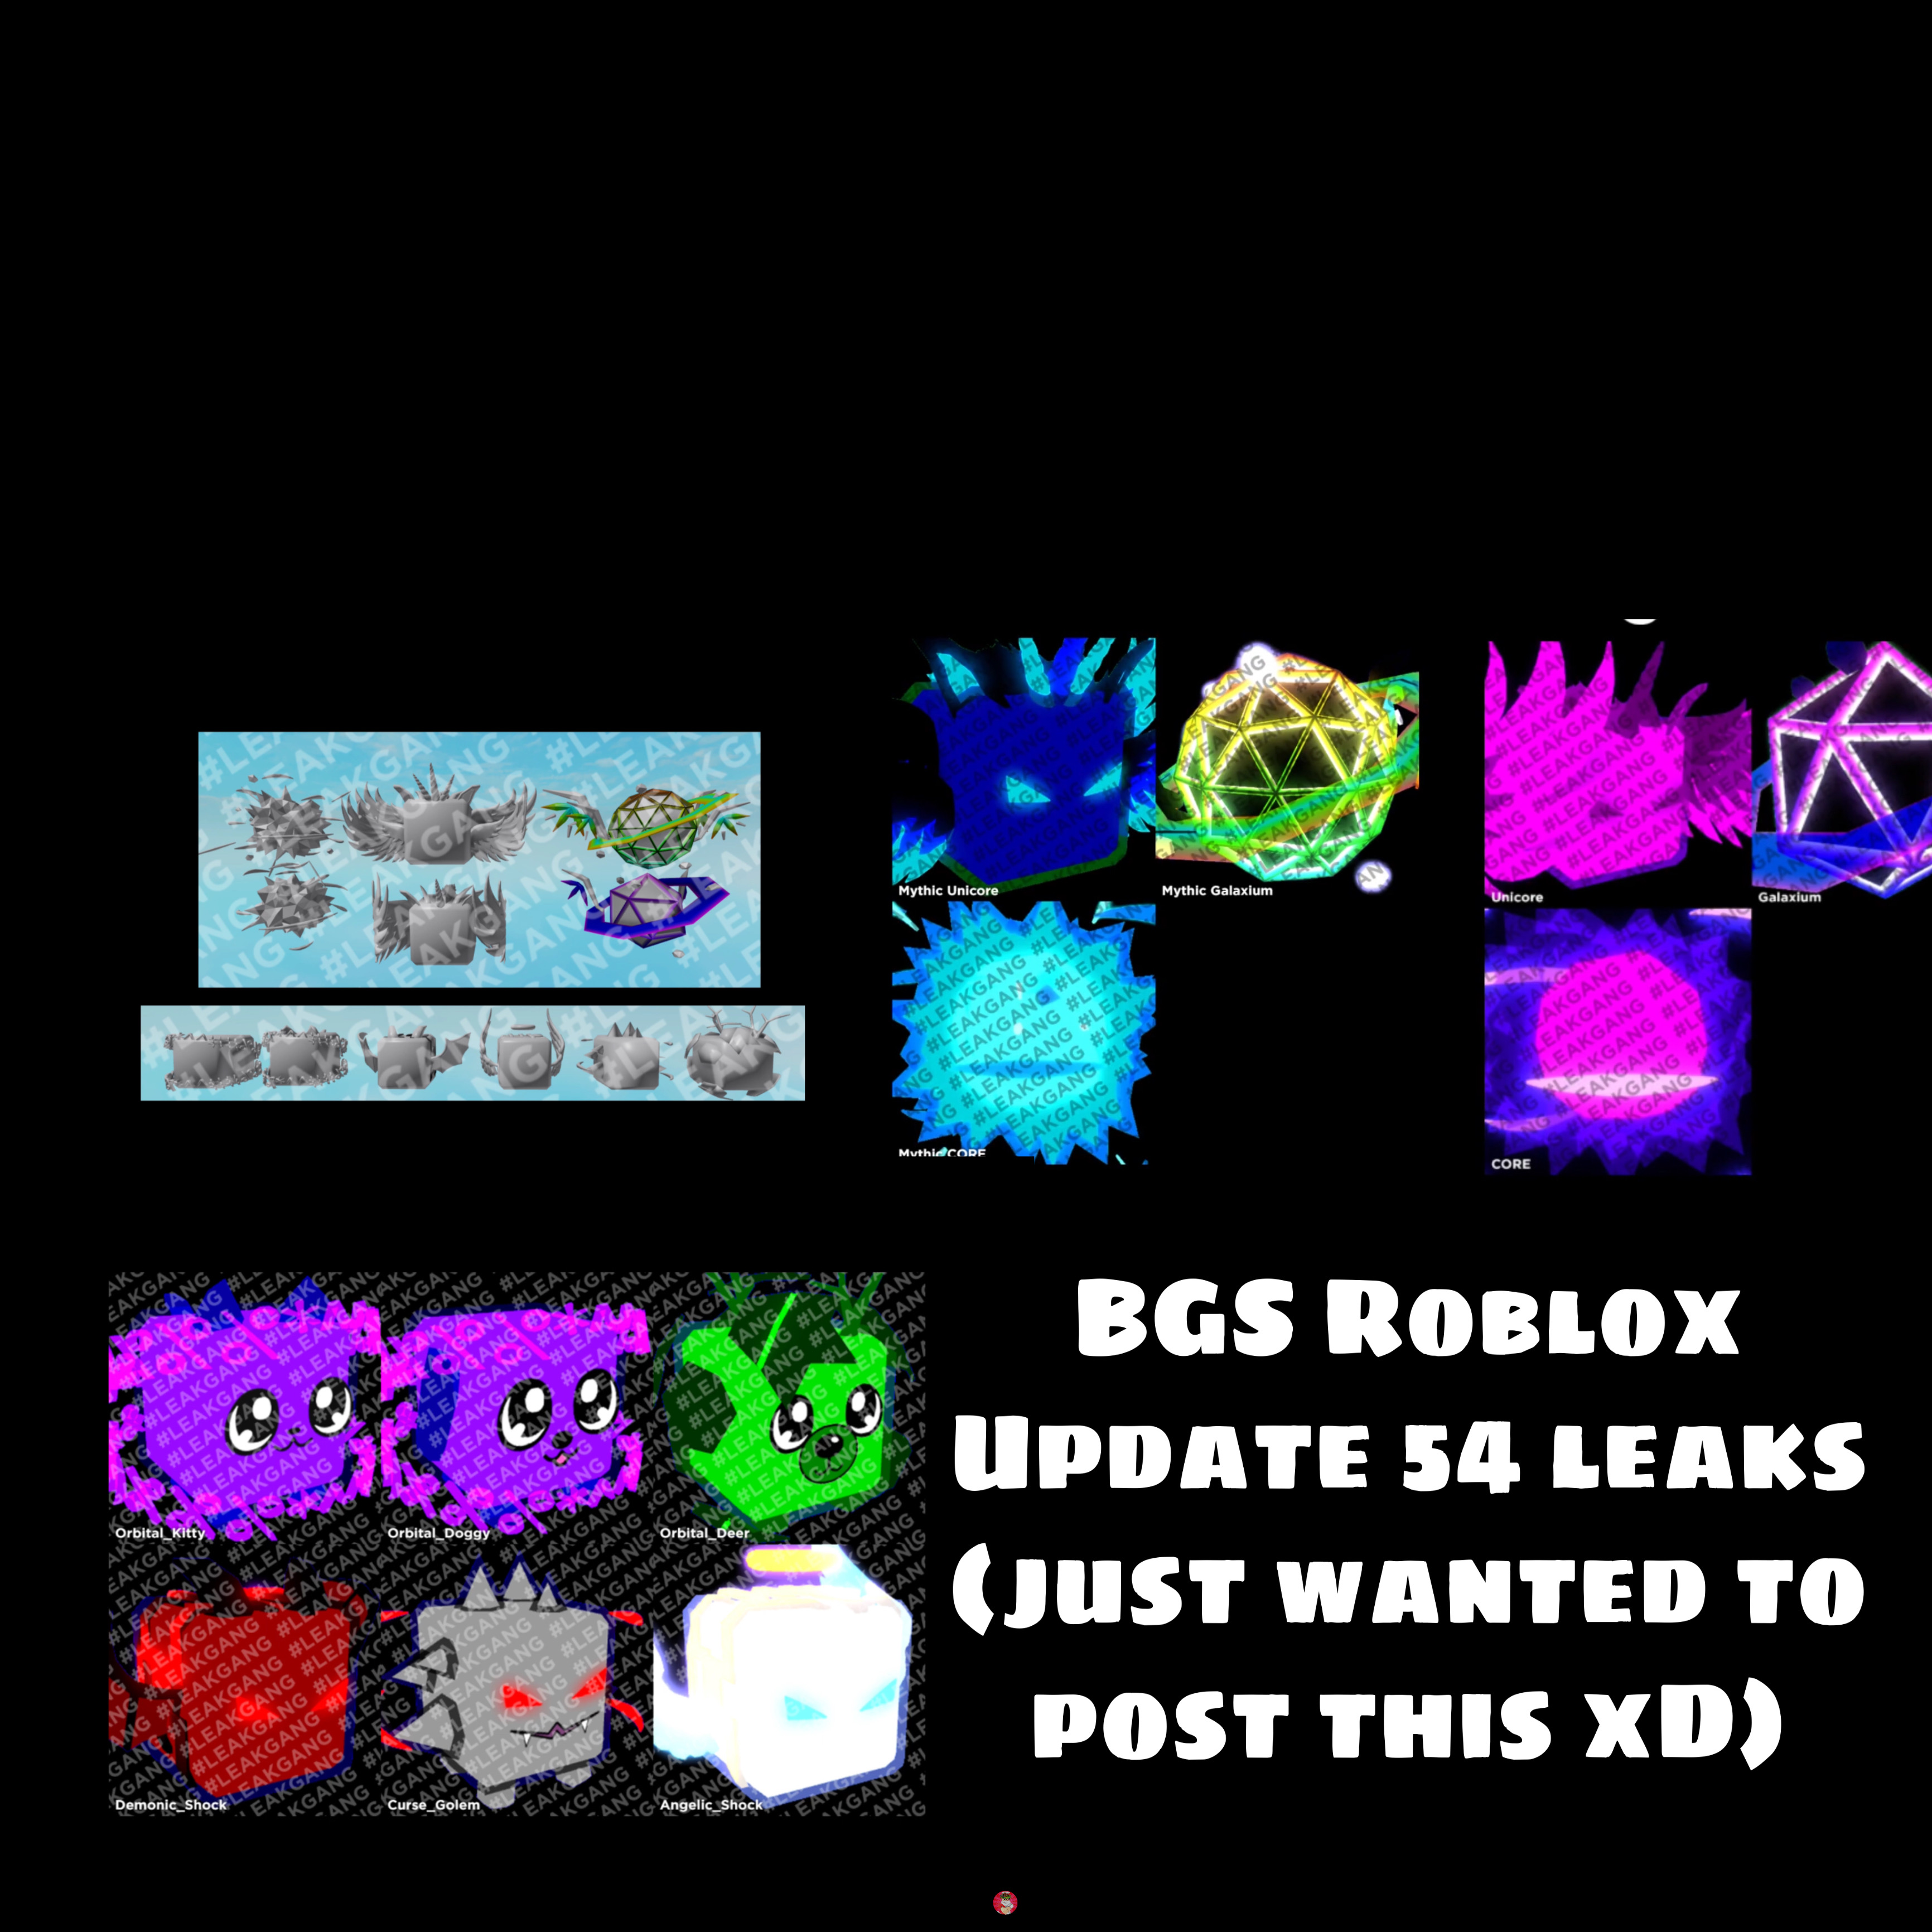 Roblox Bgs Update Leaks This Is Image By Memes4all - roblox update leaks